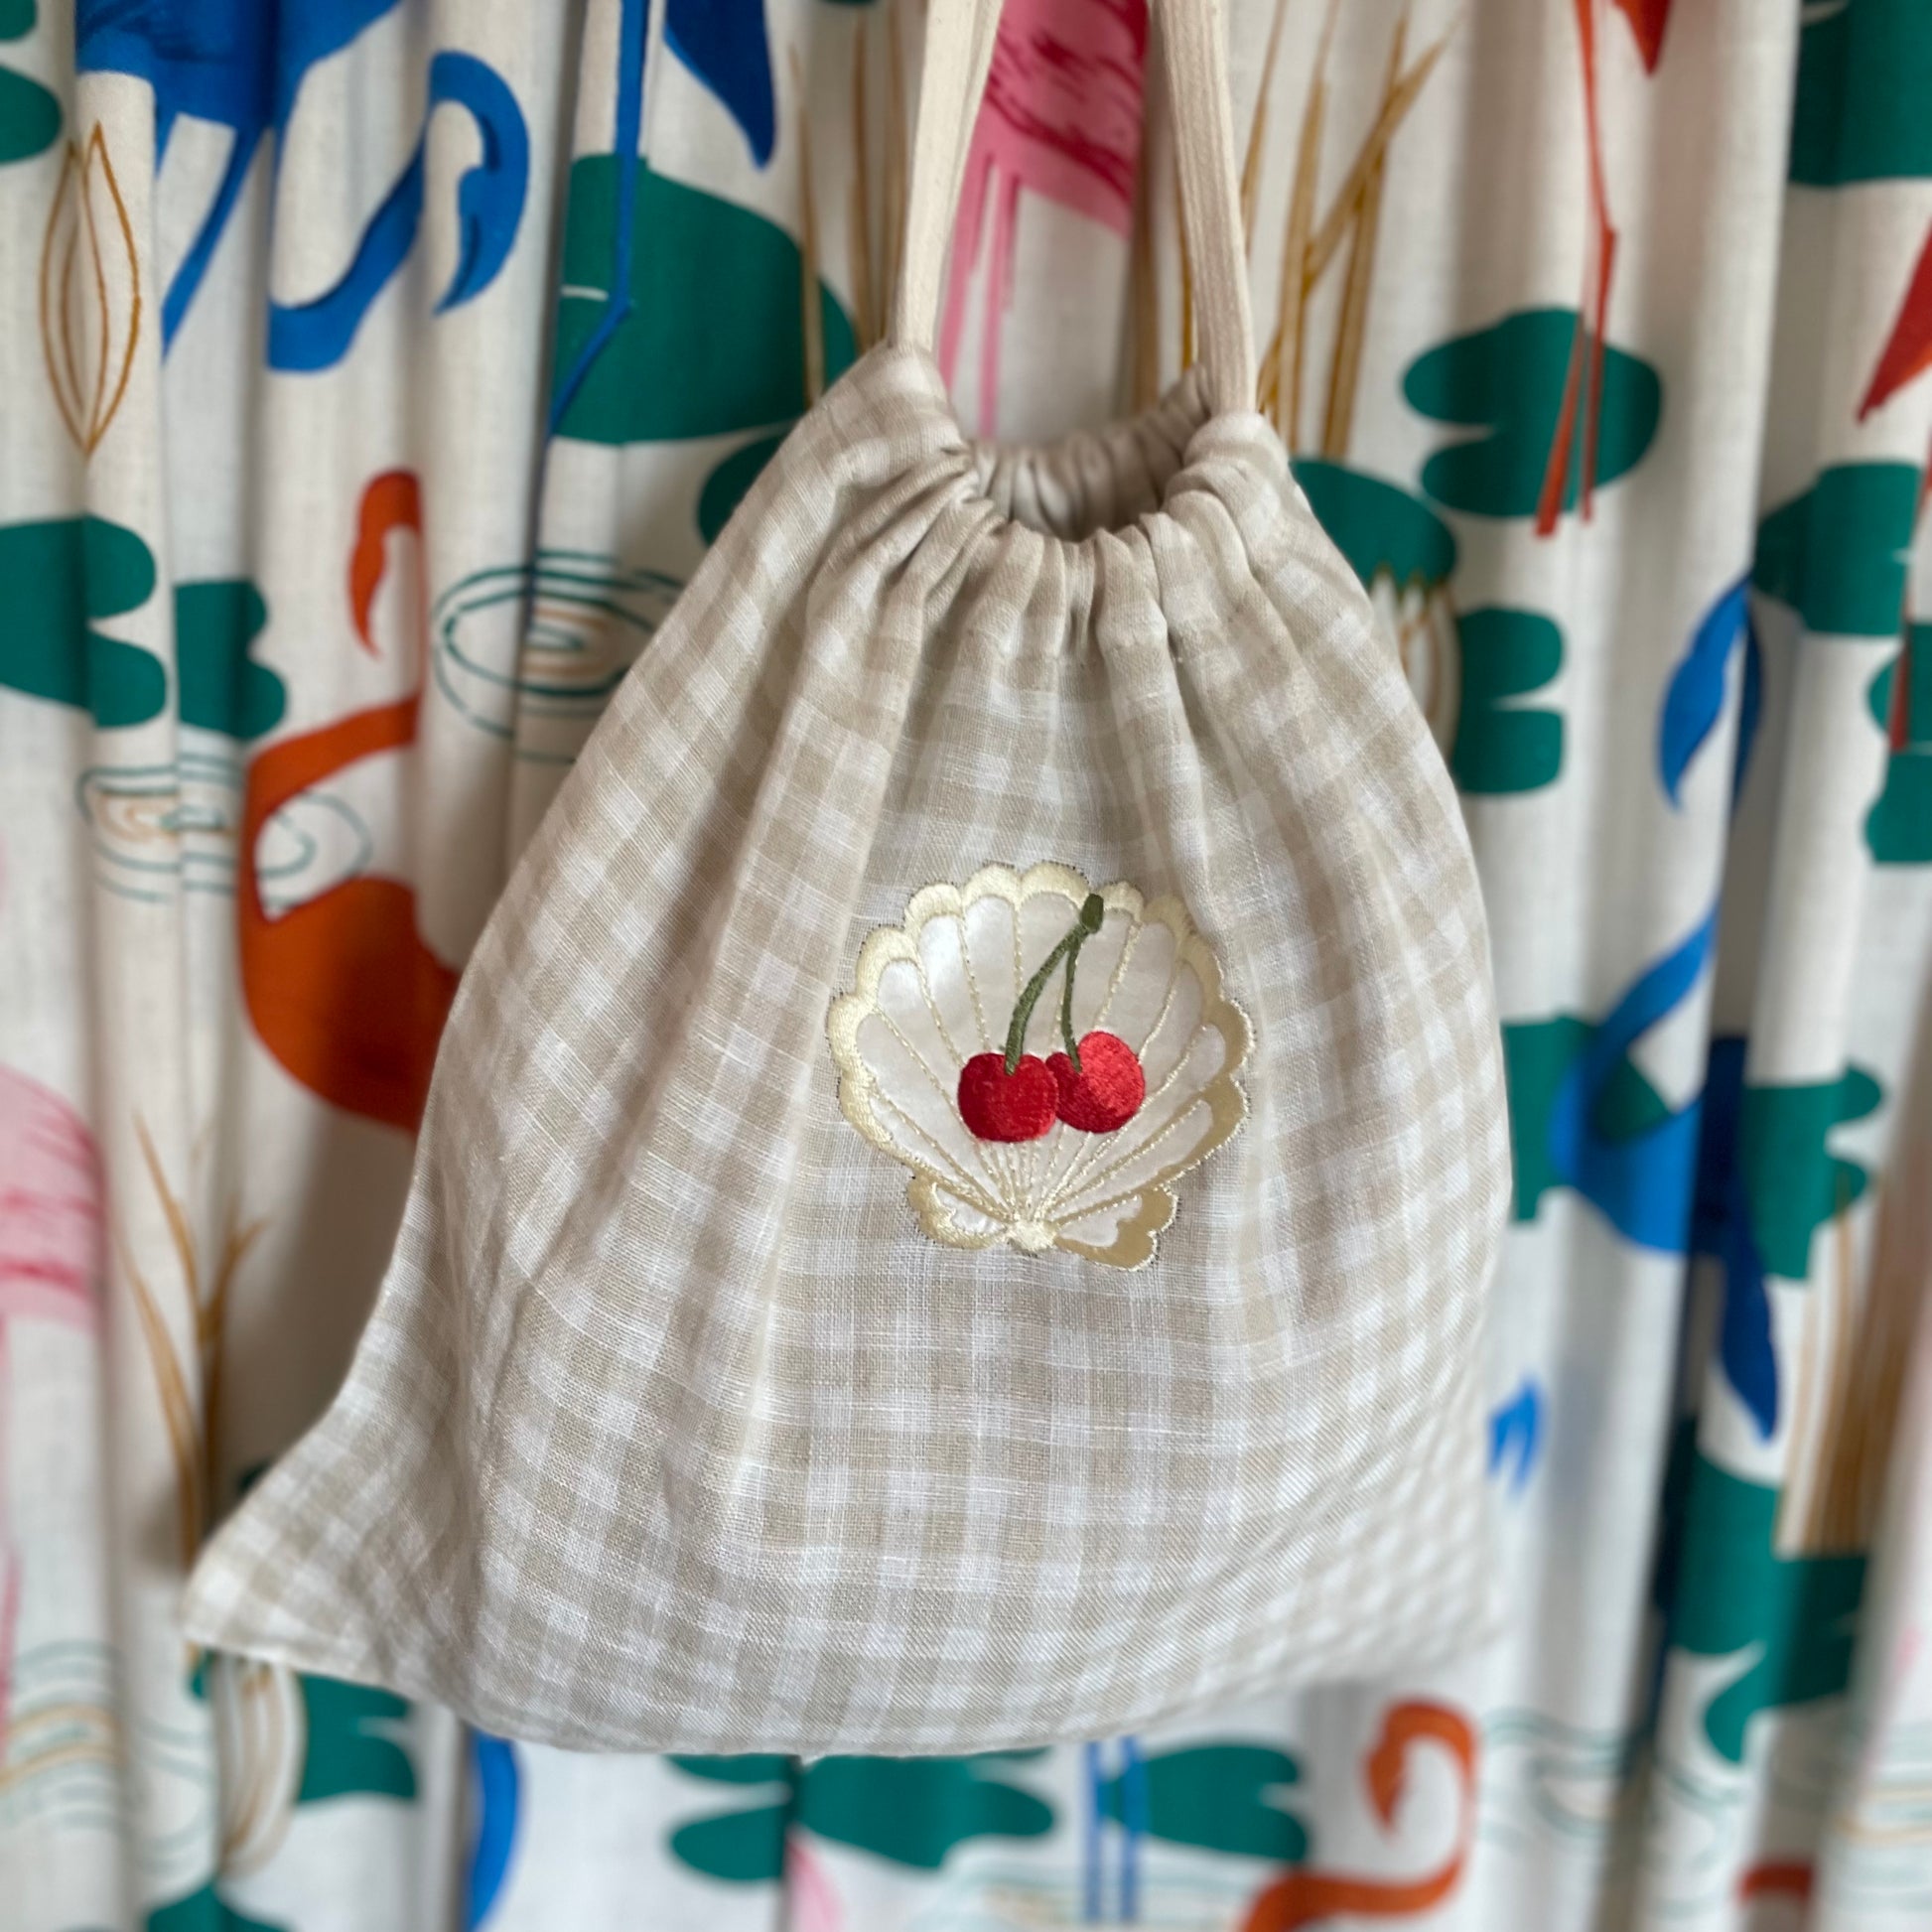 Linen drawstring bag with embroidered cherries hanging against a patterned cloth